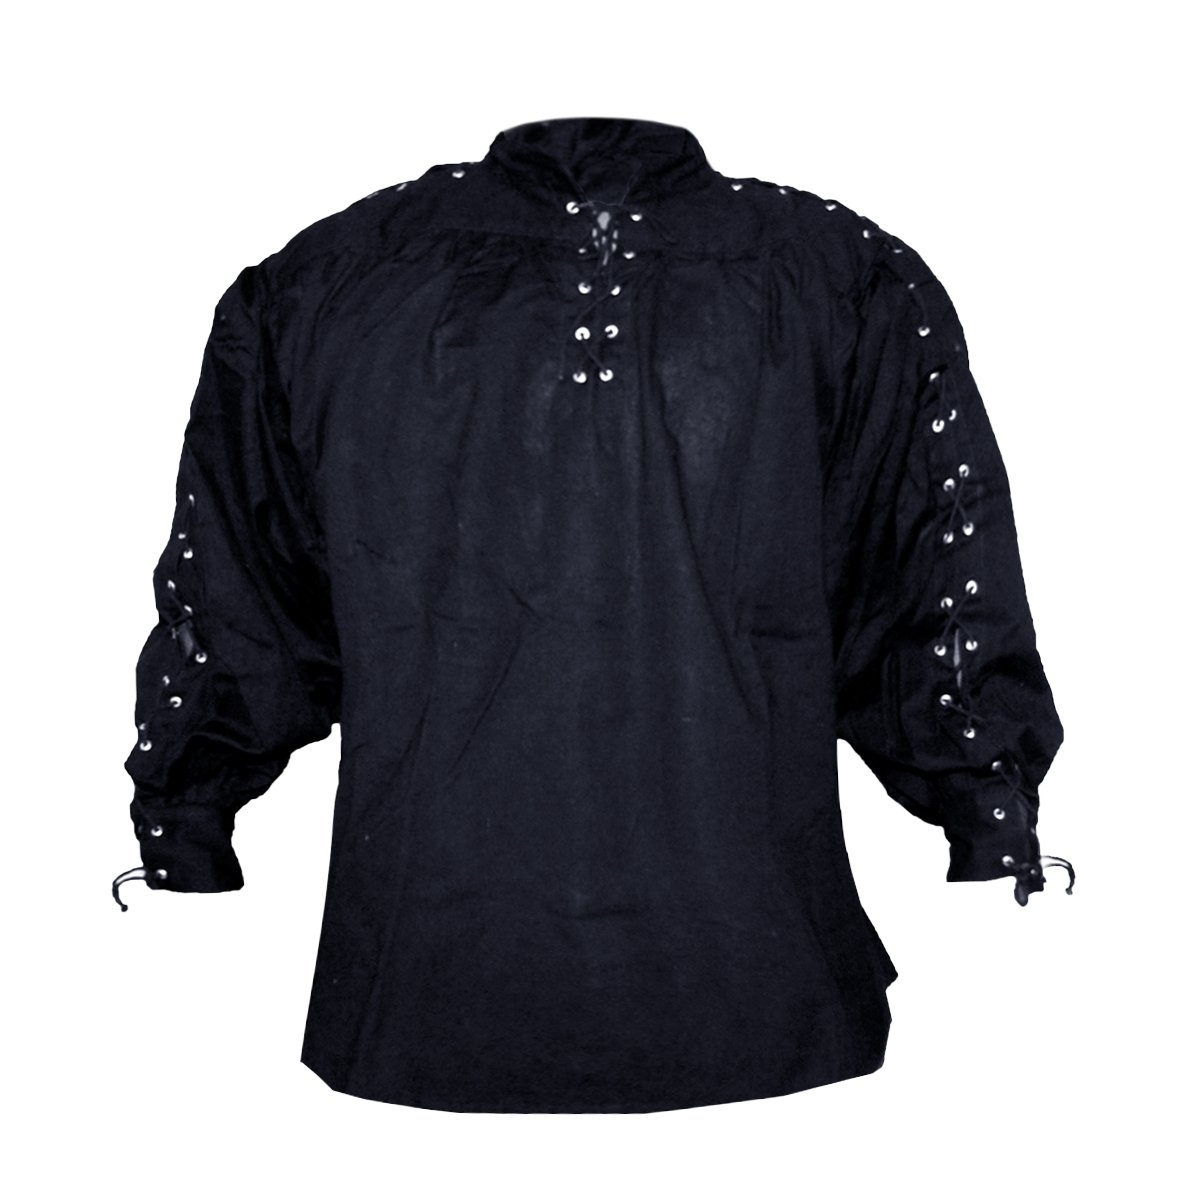 Collarless cotton shirt (laced neck & sleeves) - black, size XL